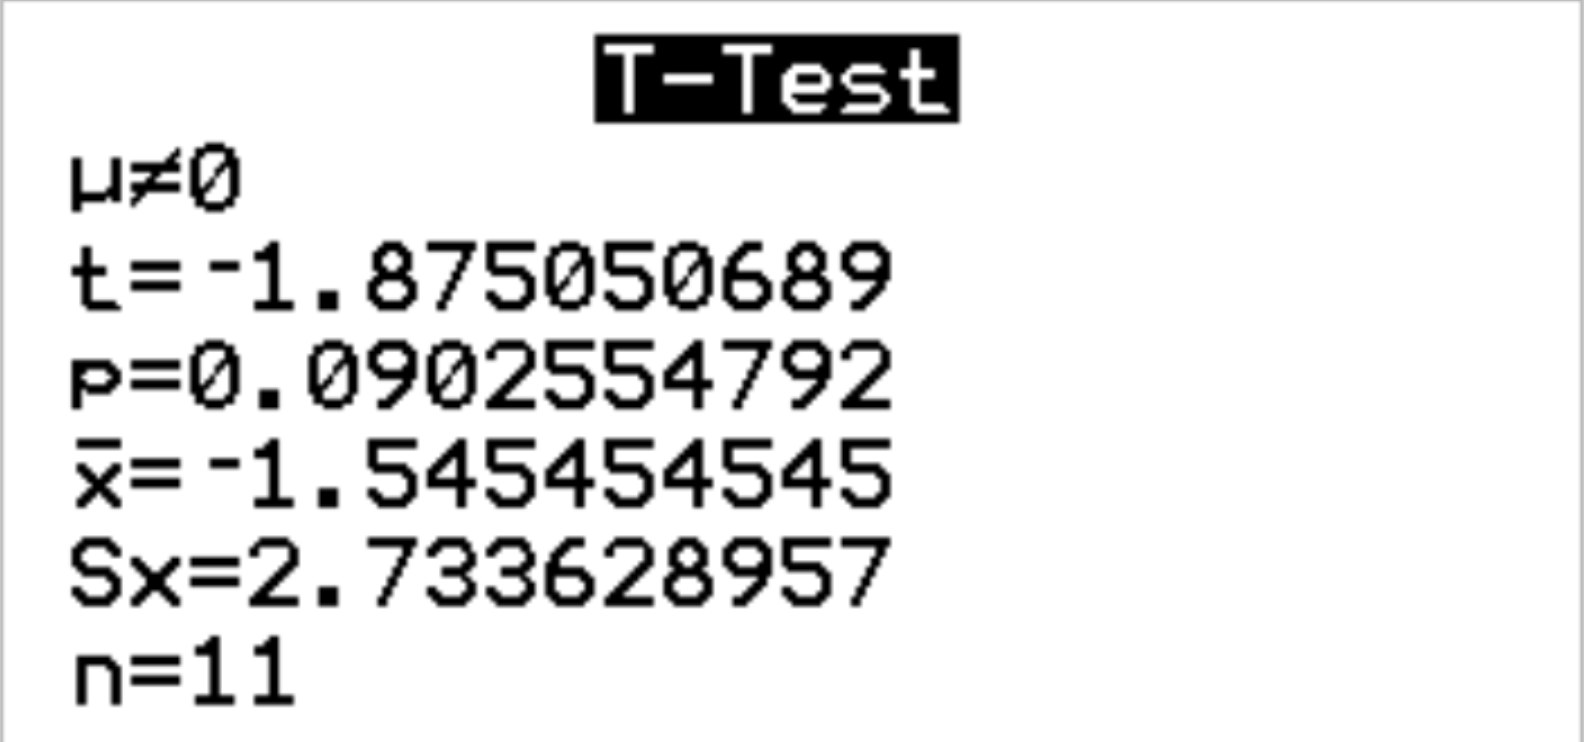 how to do a paired t test on ti 84